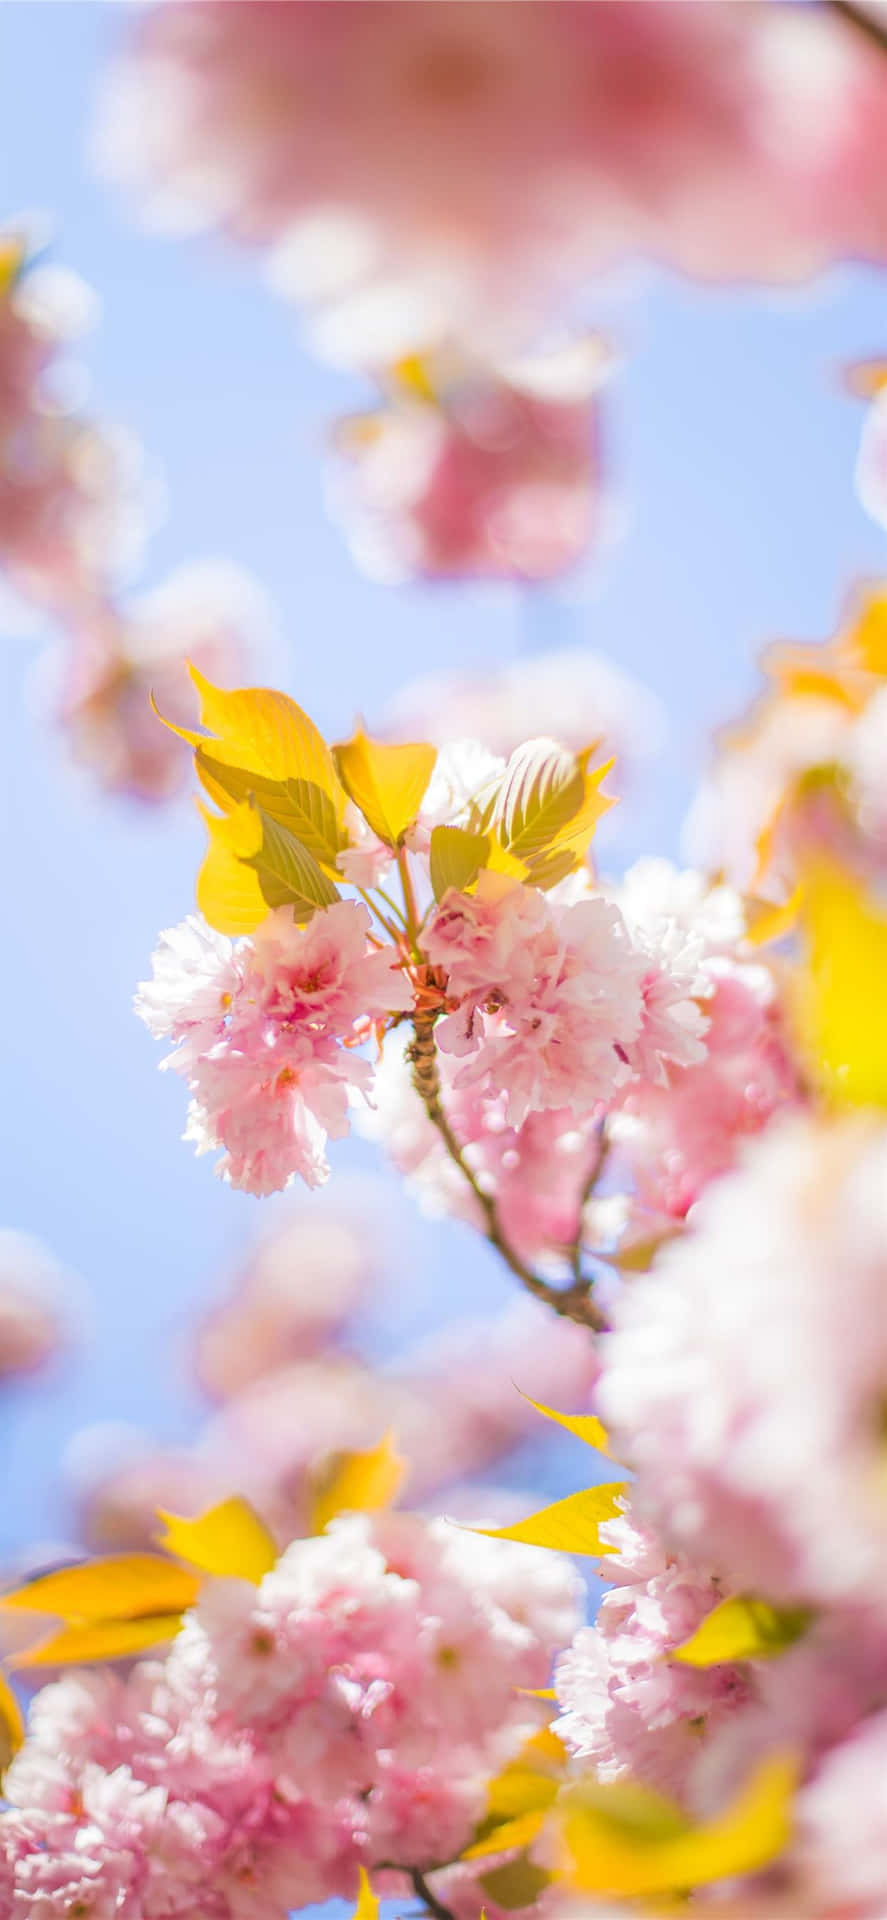 Springtime Advantage with Nature's Beauty - Pink Cherry Blossoms Wallpaper